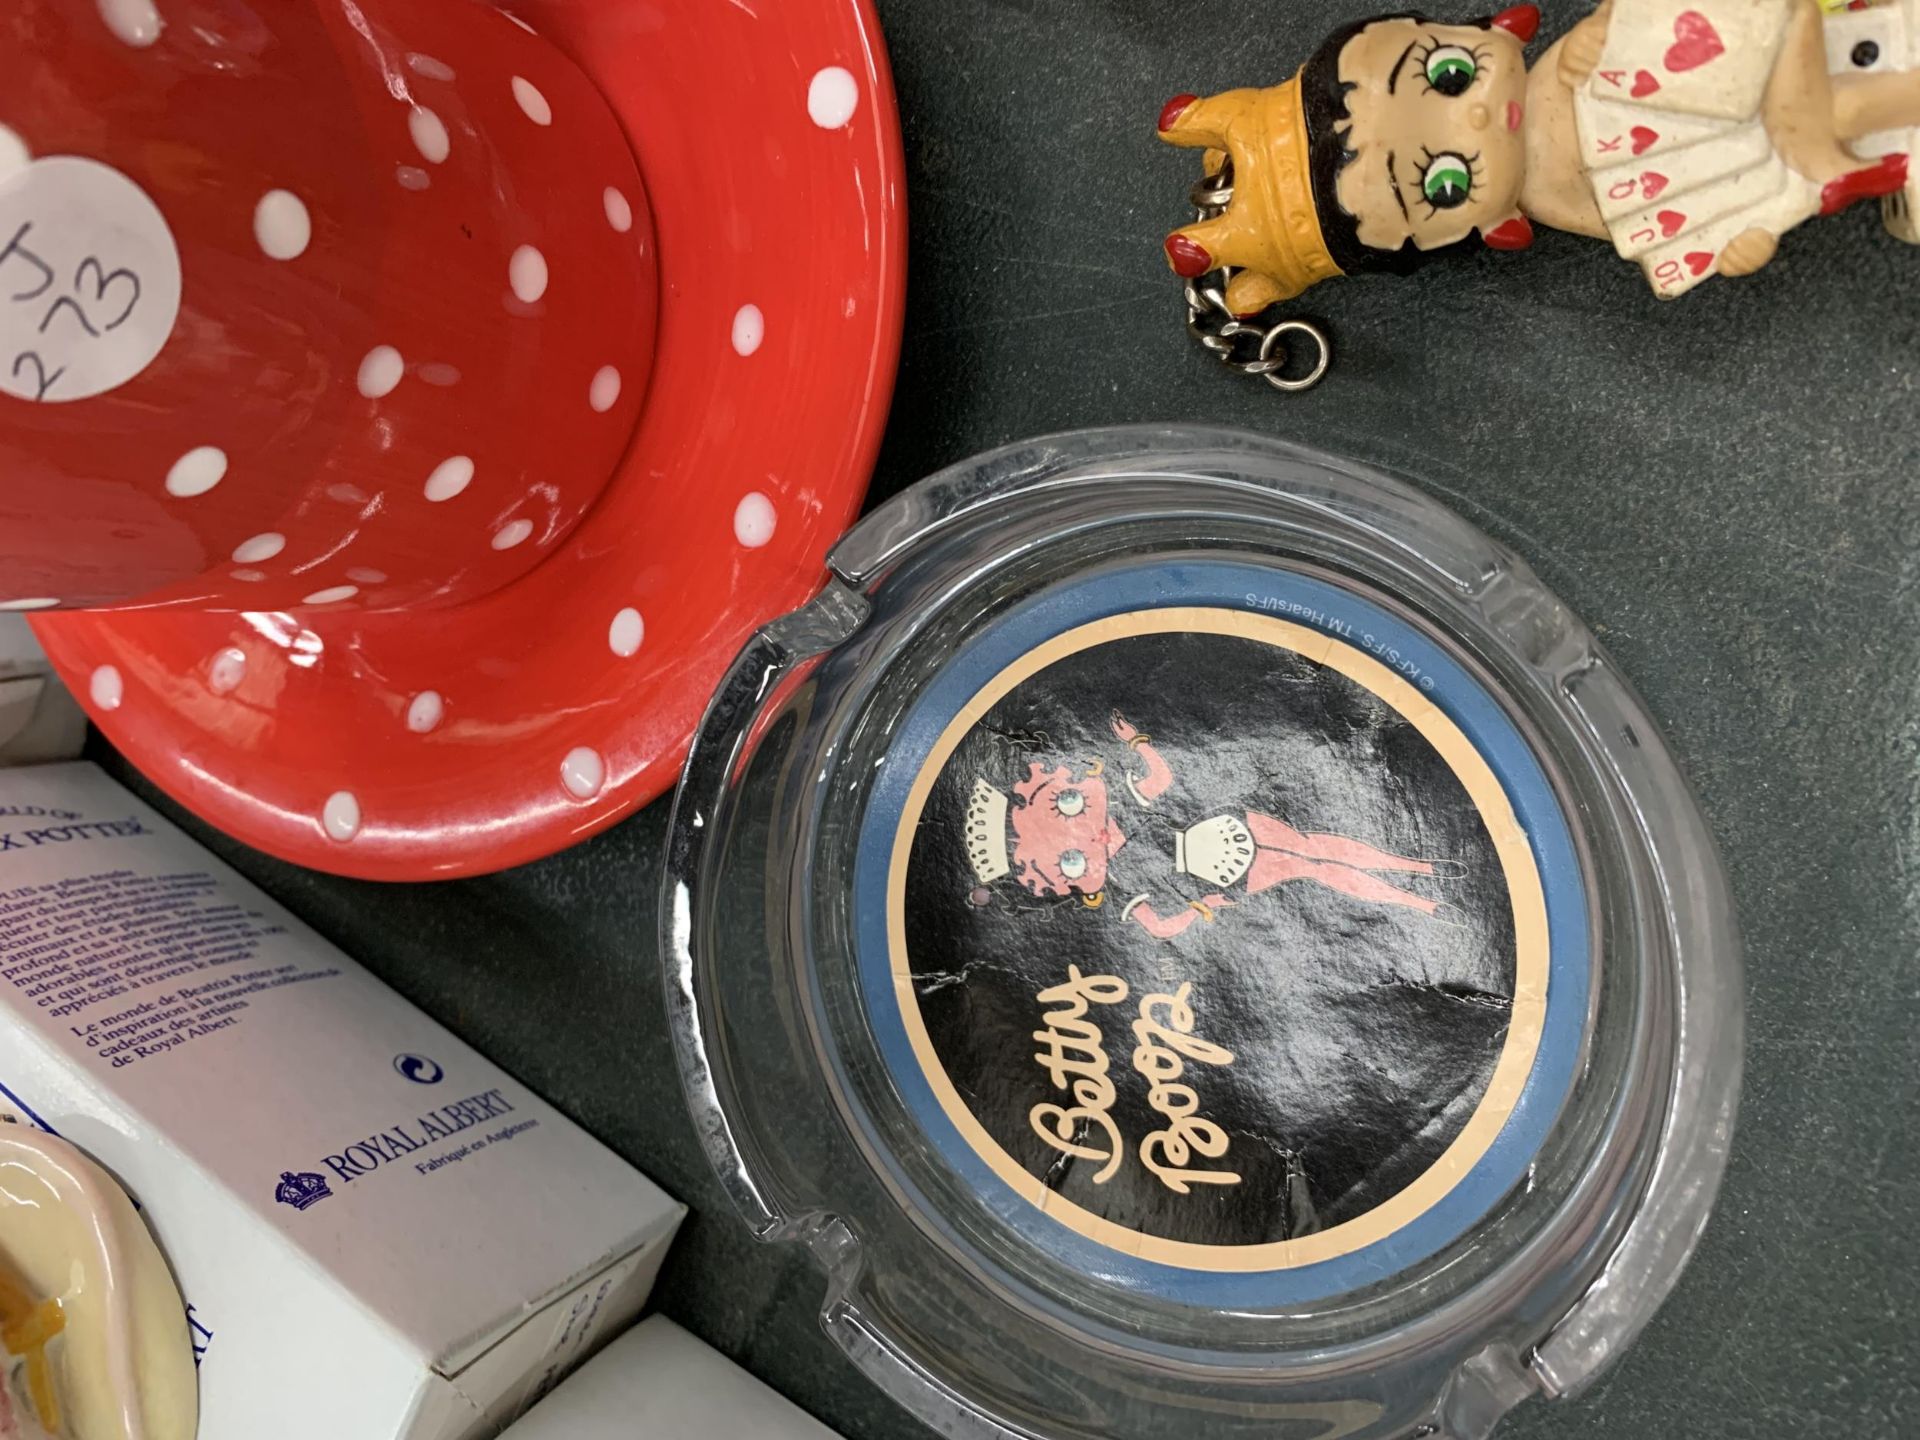 A QUANTITY OF BETTY BOOP ITEMS TO INCLUDE A MUG AND SAUCER, NUMBER PLATE, ASH TRAYS, A WATCH, KEY - Image 5 of 12